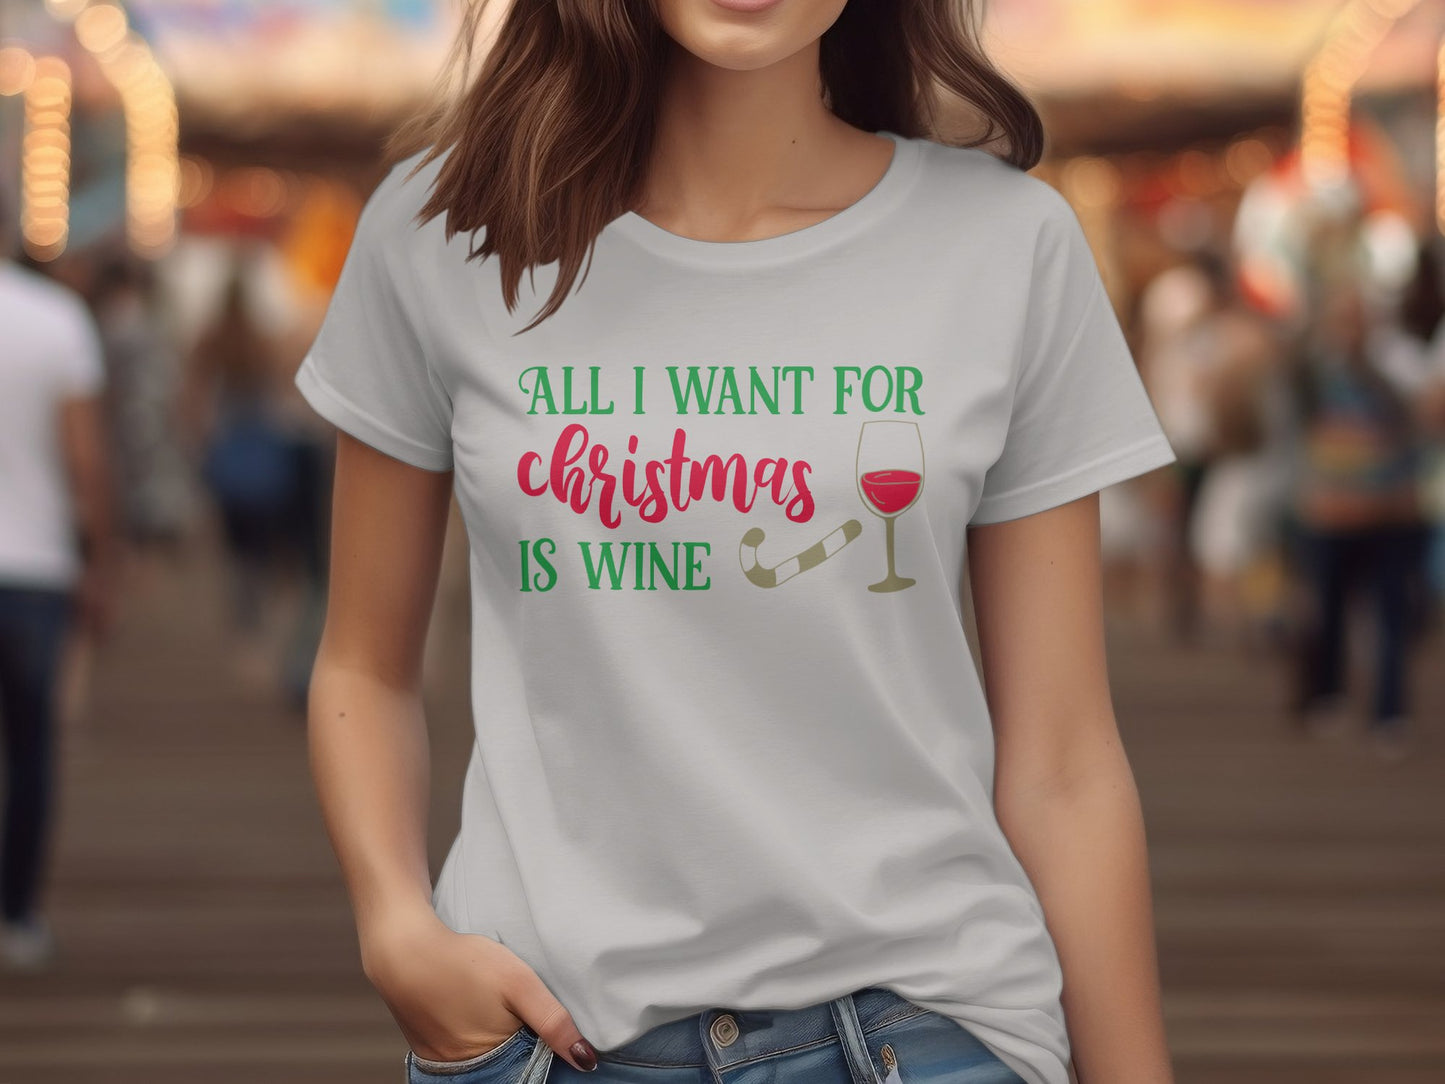 All I want For Christmas is Wine (Christmas T-shirt)